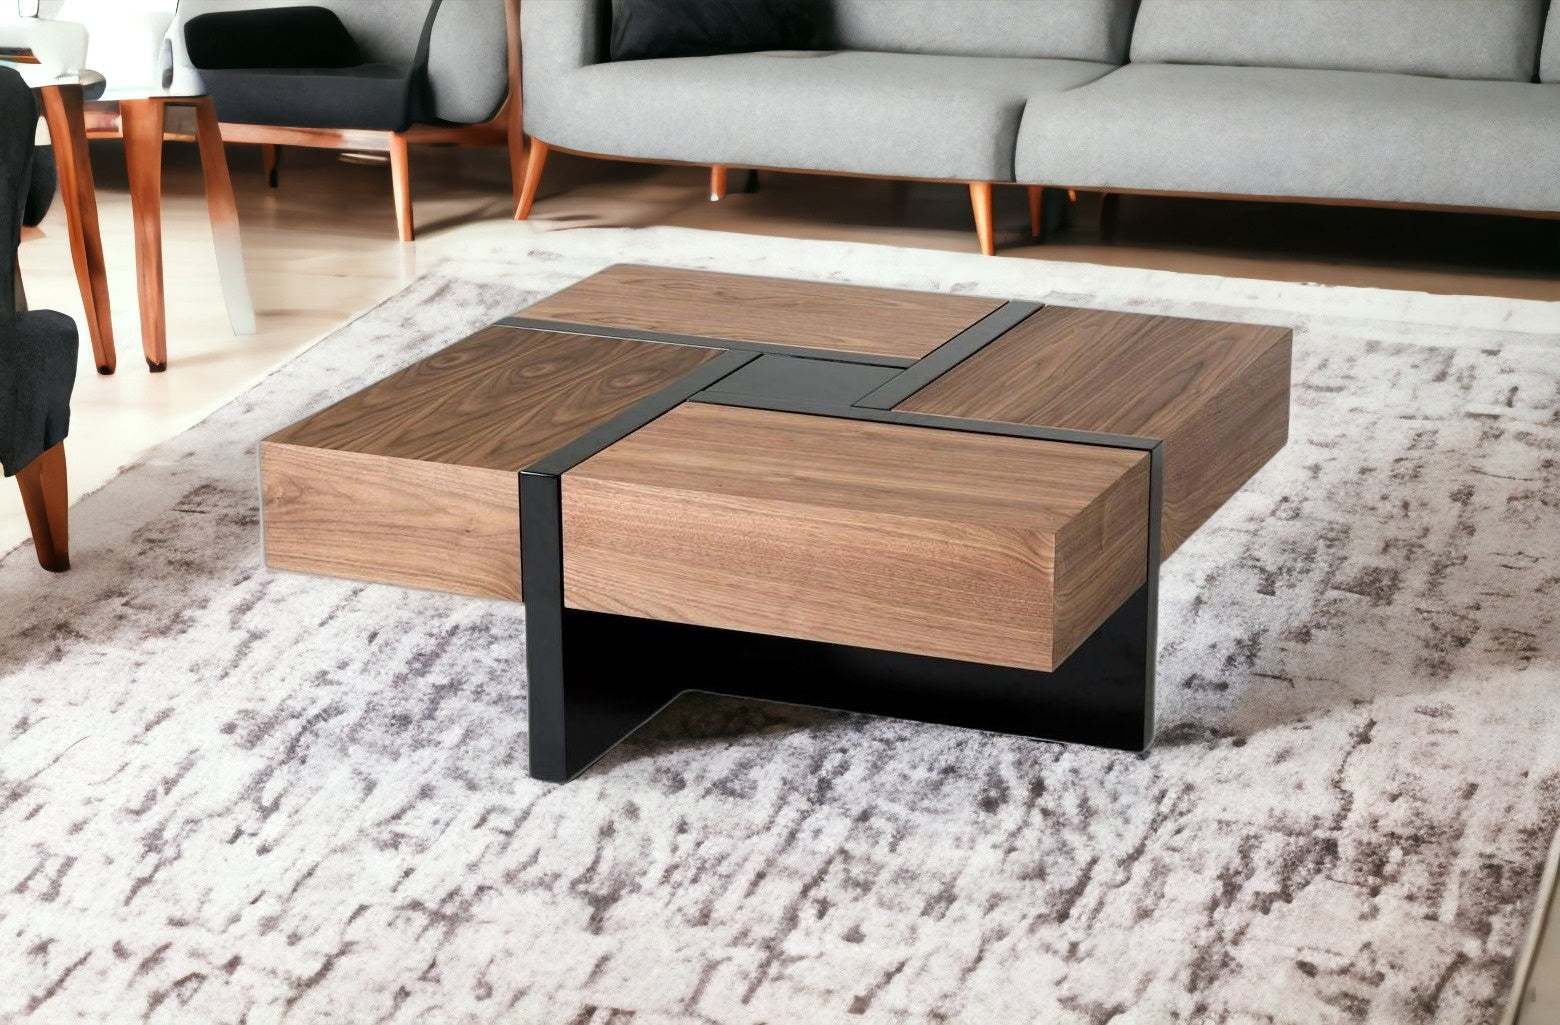 39" Brown and Black and Black Square Coffee Table with Four Drawers